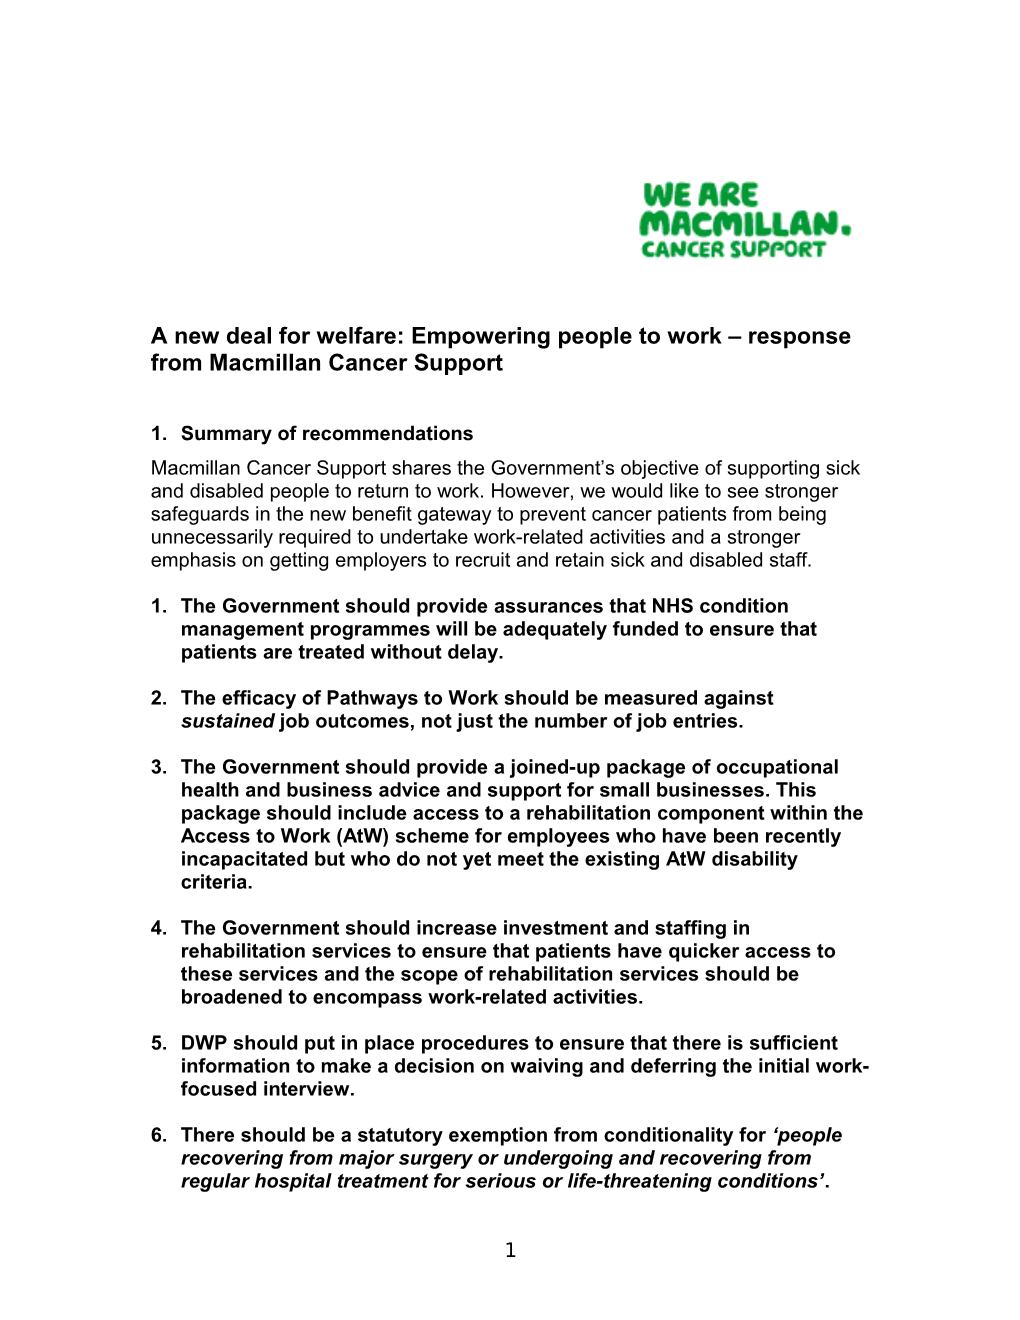 Macmillan Cancer Support Welcomes the Opportunity to Respond to the a New Deal for Welfare